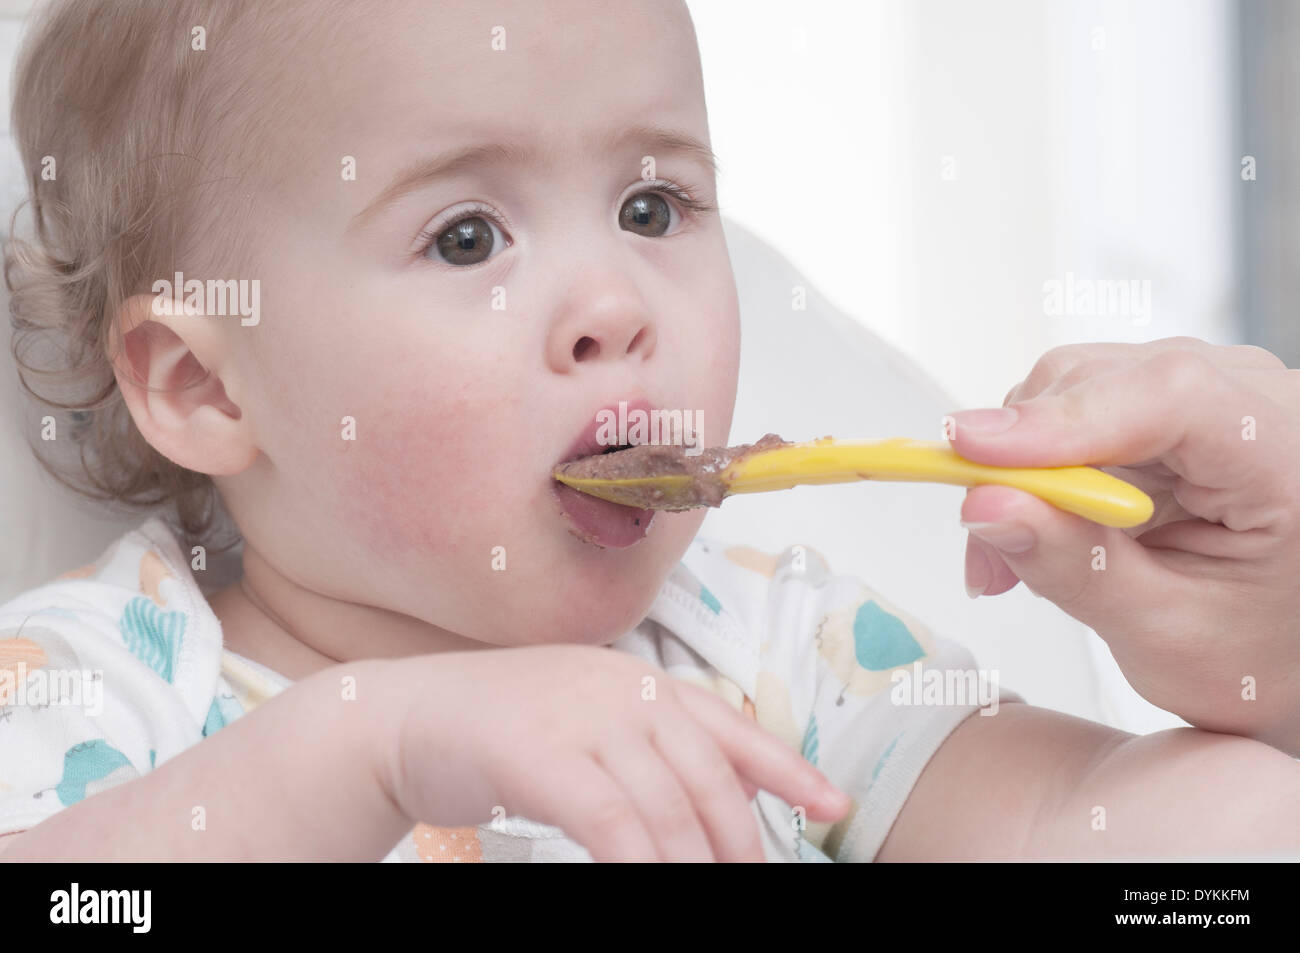 Baby in chair eating baby food from a spoon Stock Photo